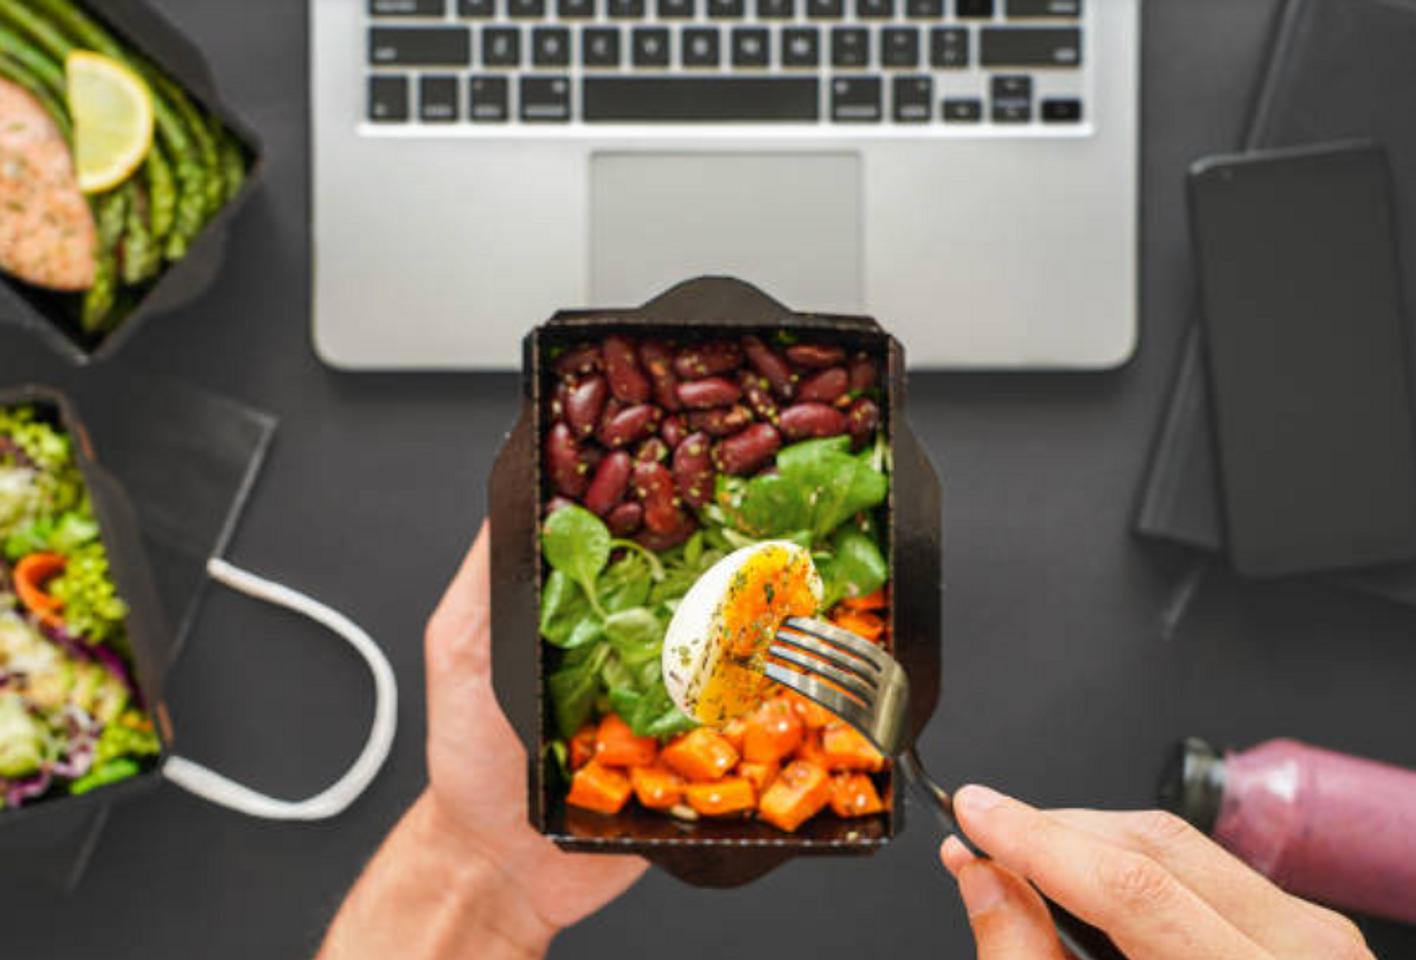 Set Meal Plans Vs Flexible Plans: Which Is Better?